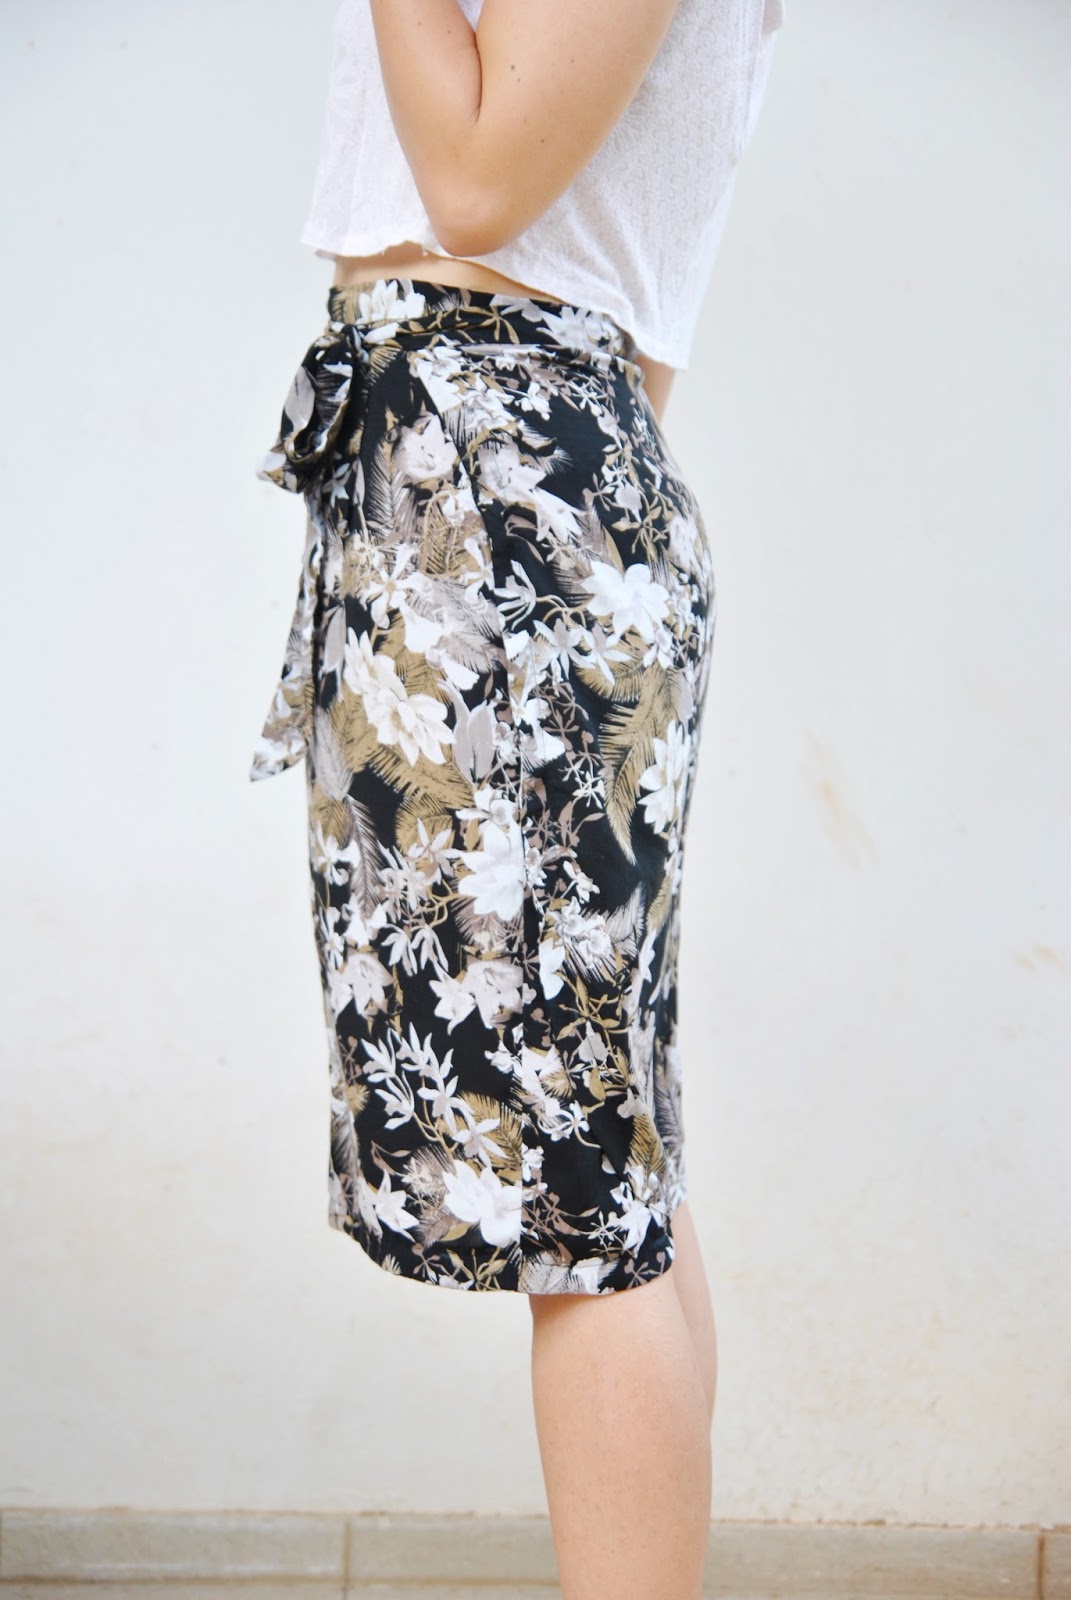 Orsola skirt // By Hand London - //THE WARDROBE PROJECT//